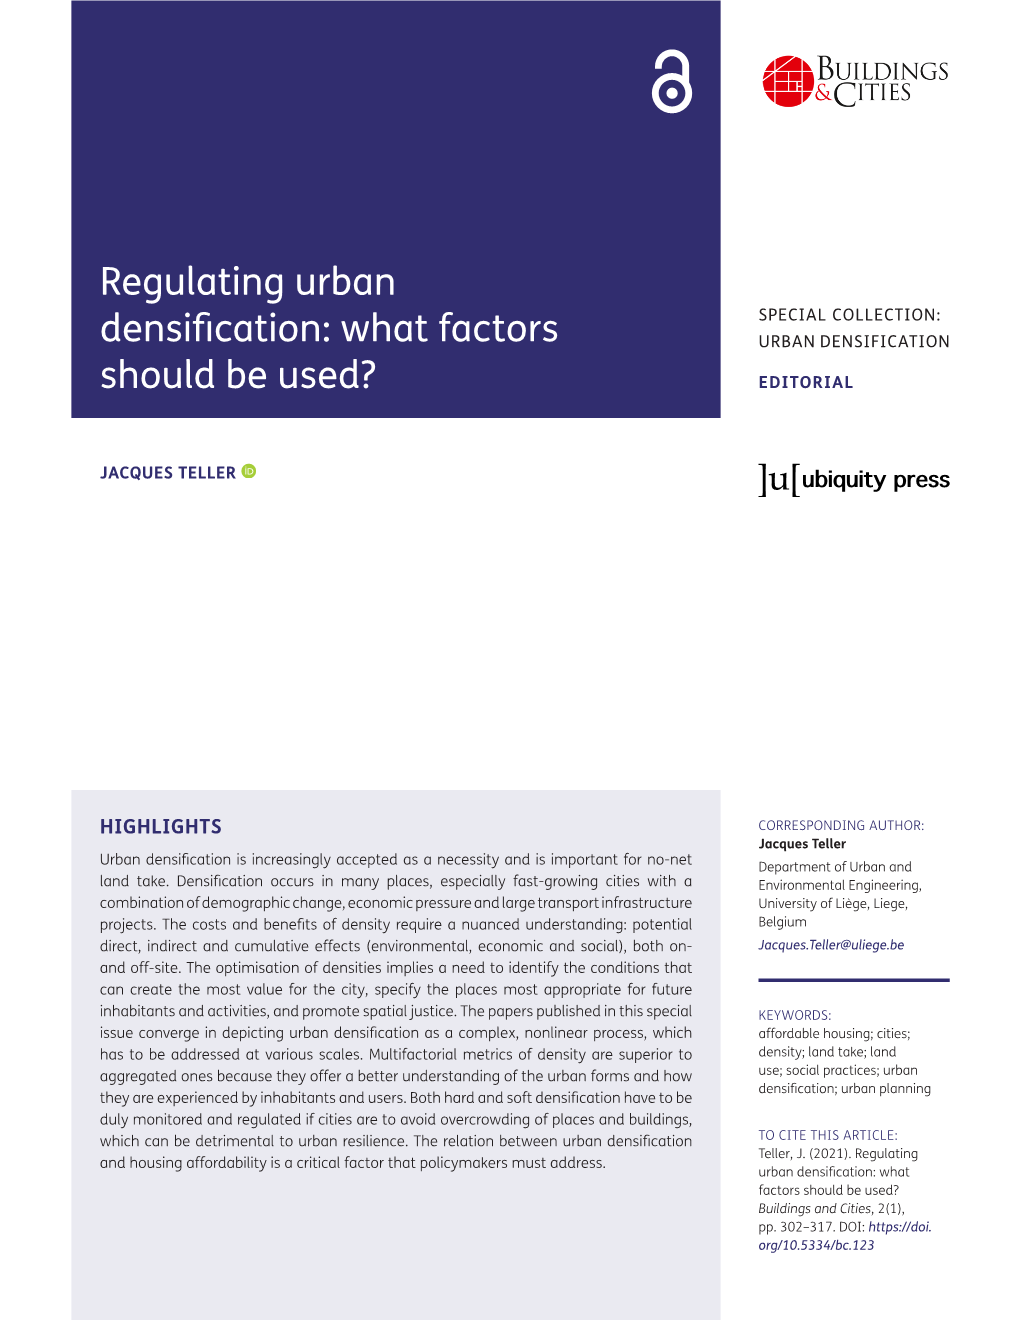 Regulating Urban Densification: What Factors Should Be Used? Buildings and Cities, 2(1), Pp